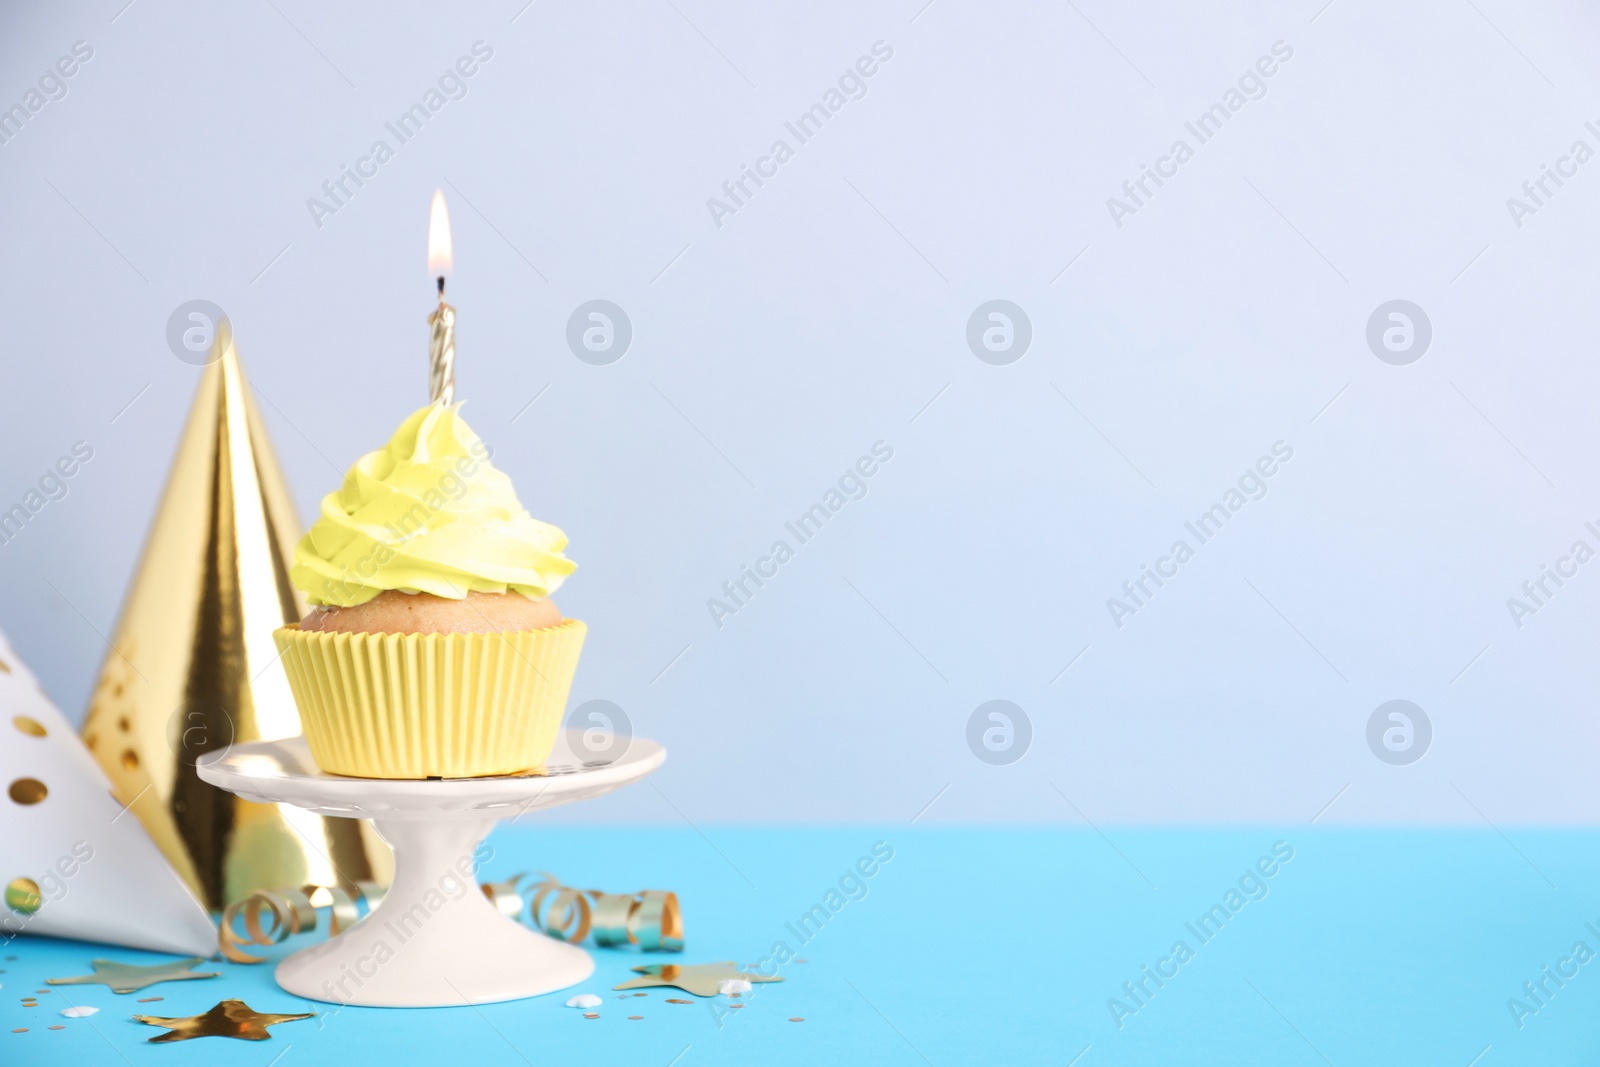 Photo of Delicious birthday cupcake with burning candle and party decor on light blue table against grey background, space for text